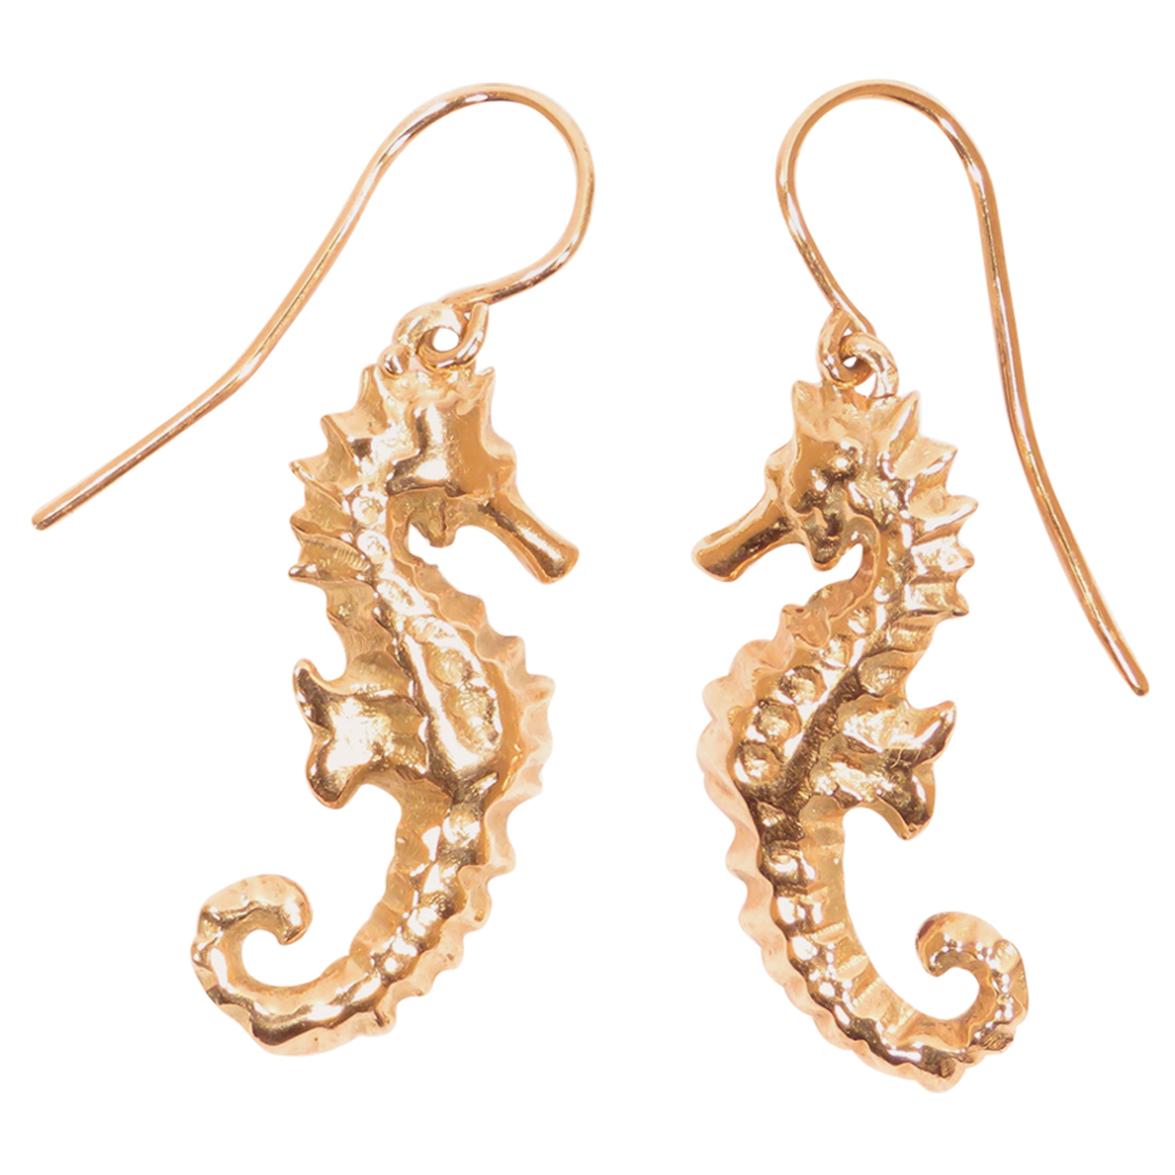 Seahorse Rose Gold Dangle Earrings Handcrafted in Italy by Botta Gioielli